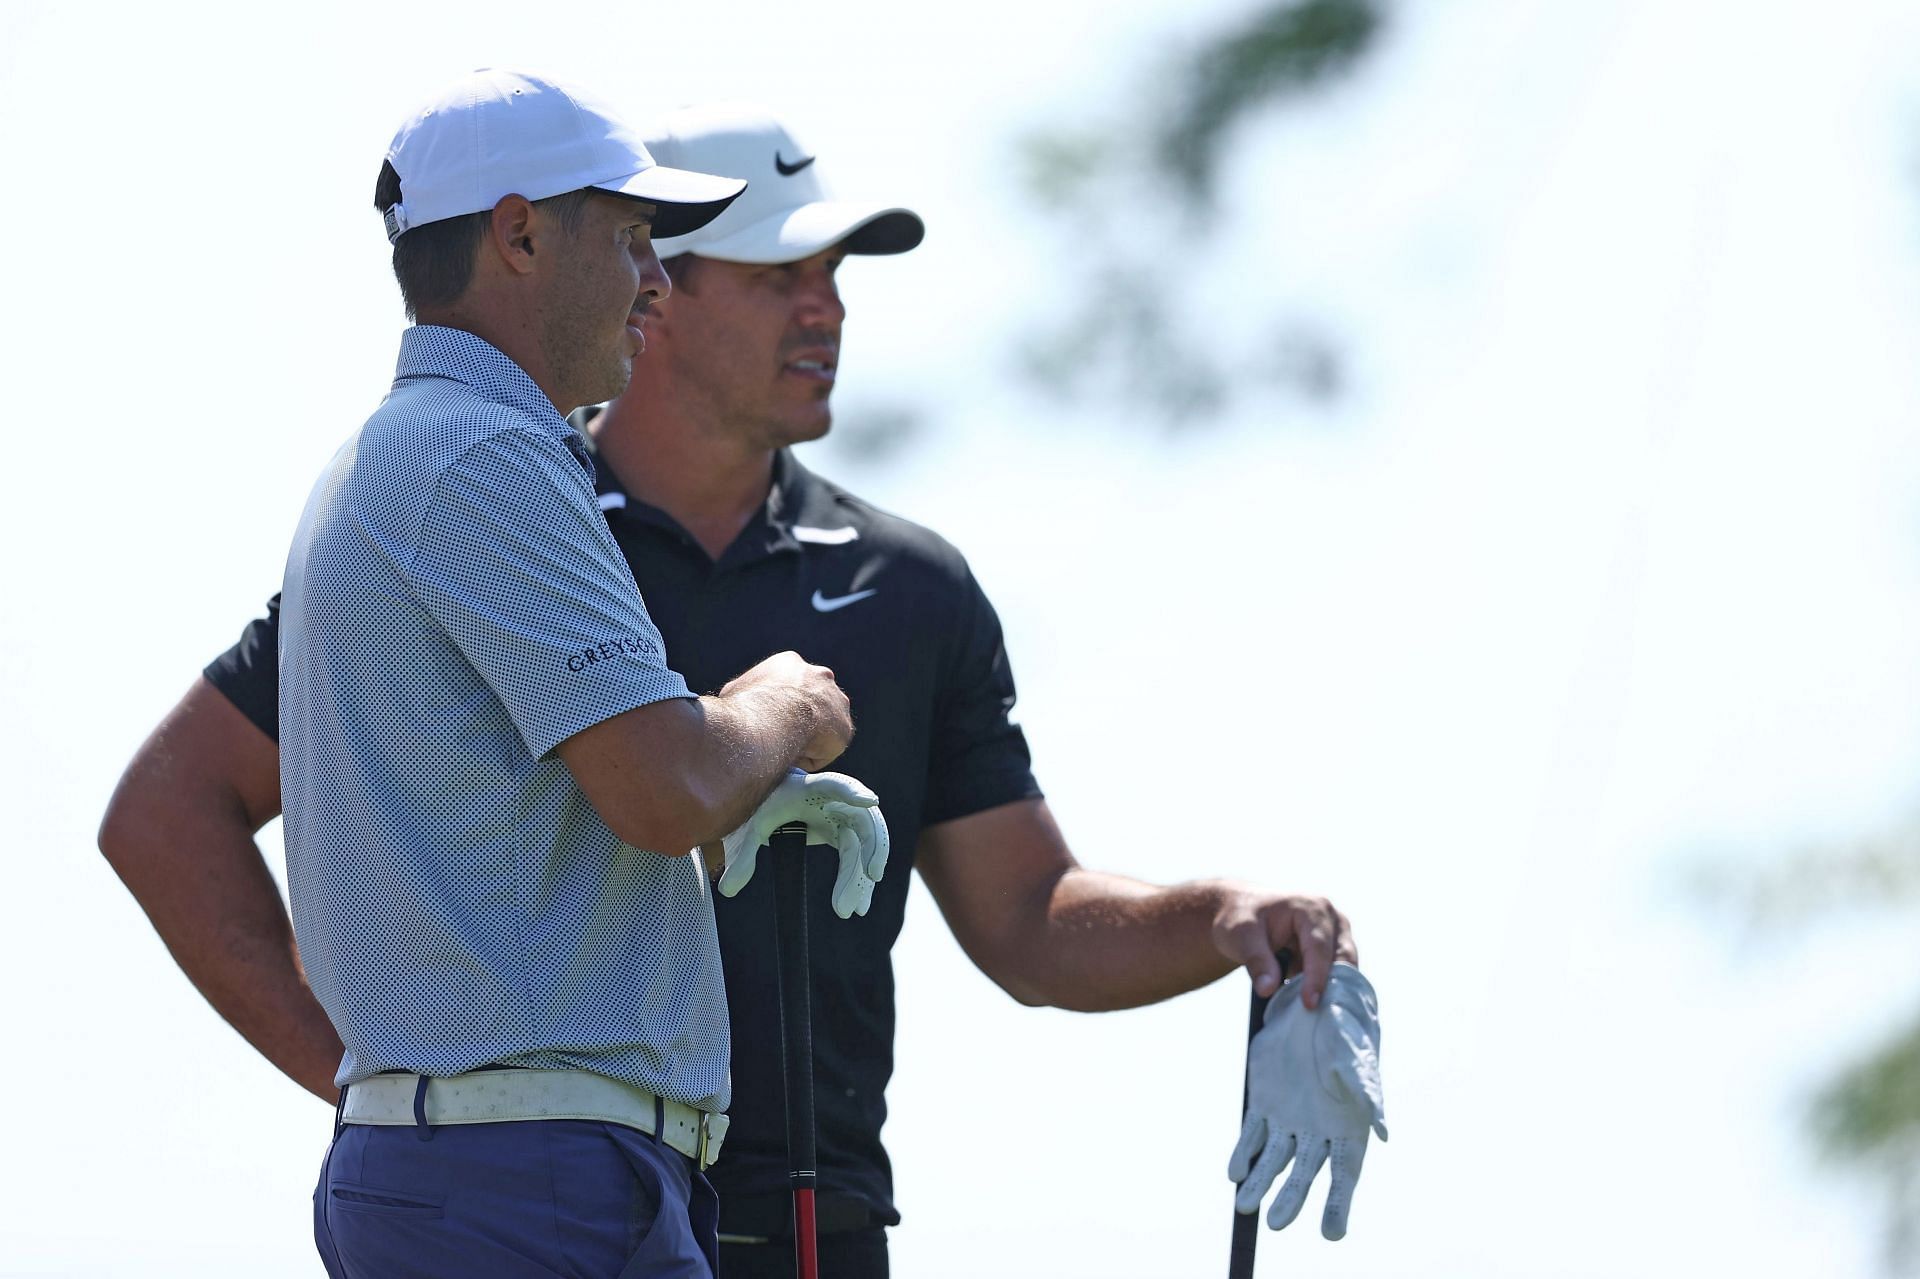 “Sometimes the results don't show right away”: Brooks Koepka hopeful of ...